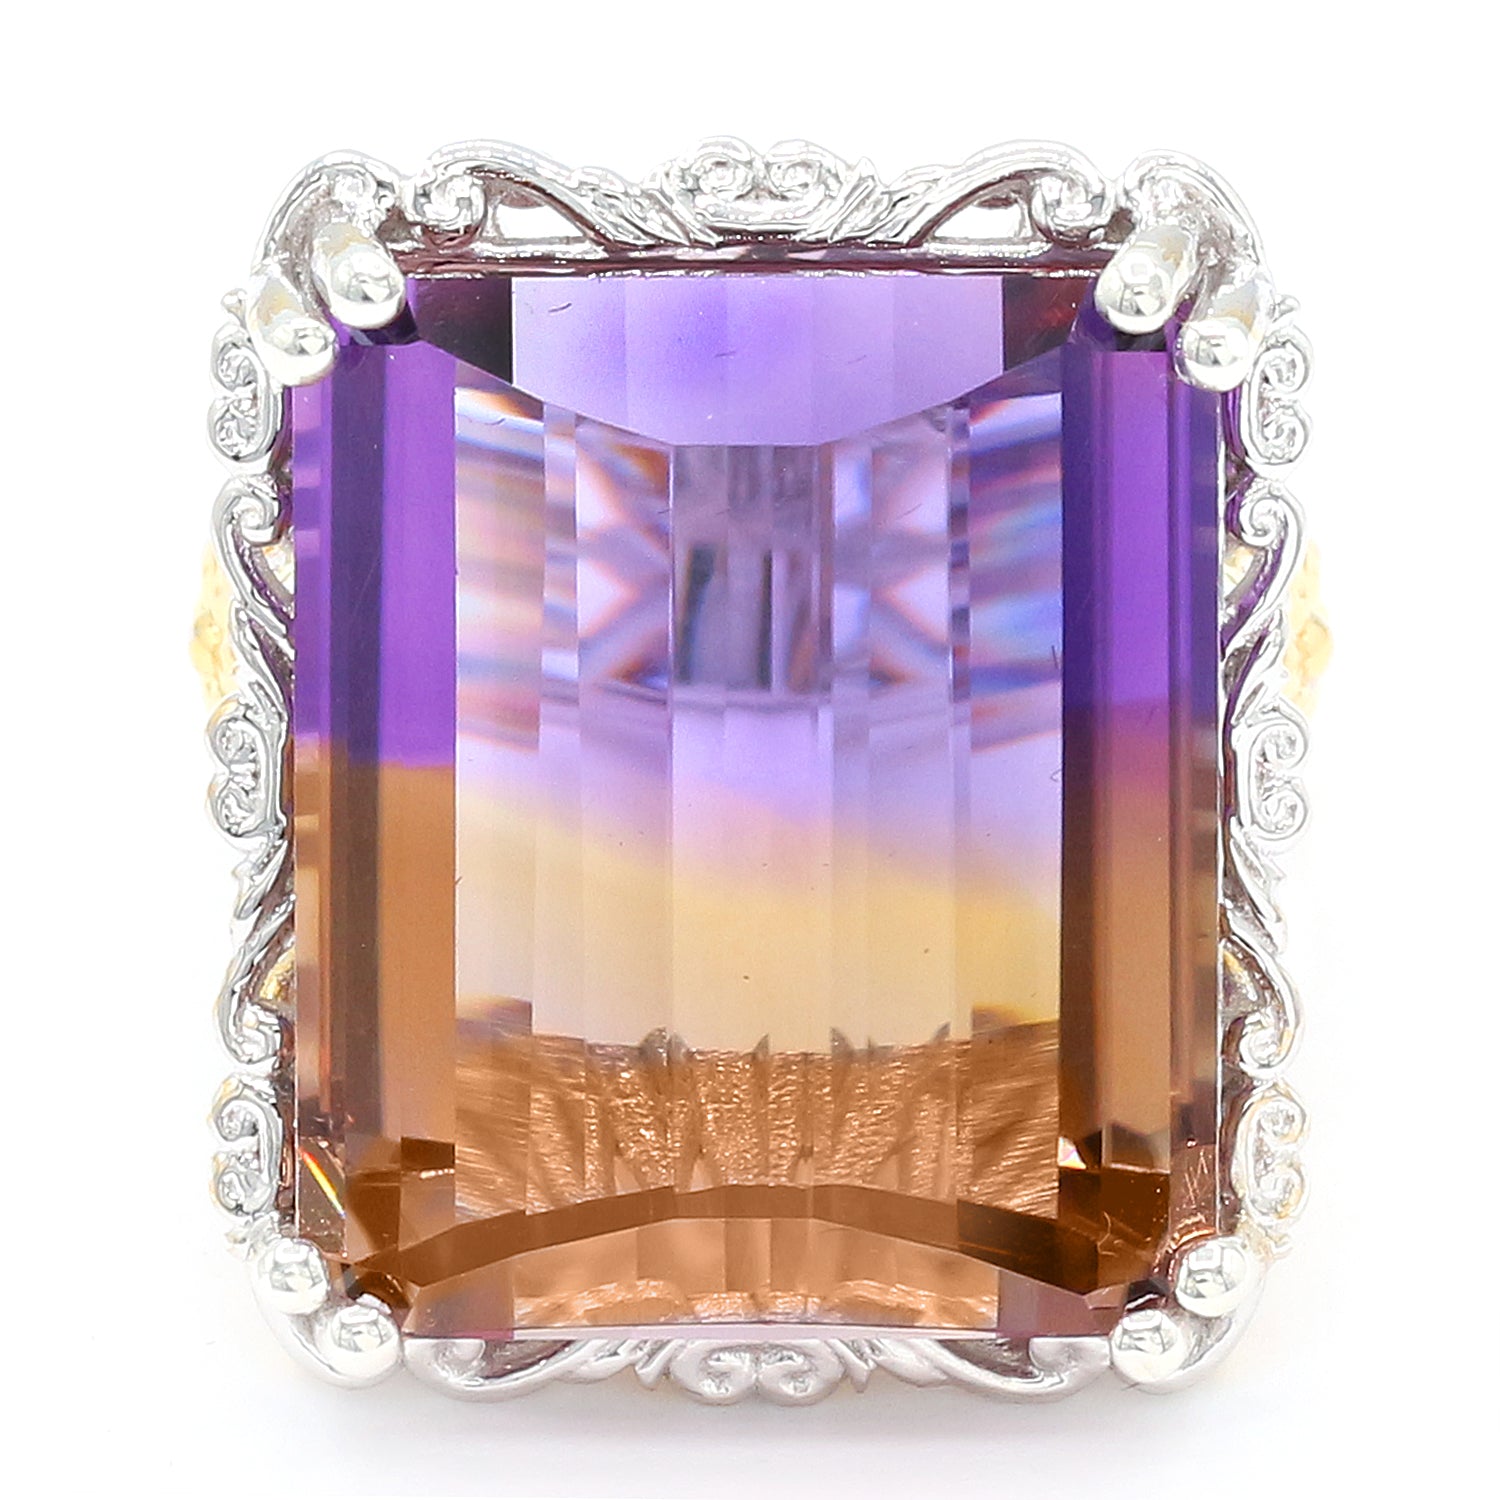 Limited Edition Gems en Vogue Luxe, One-of-a-Kind 32.74ctw Ametrine Honker Ring